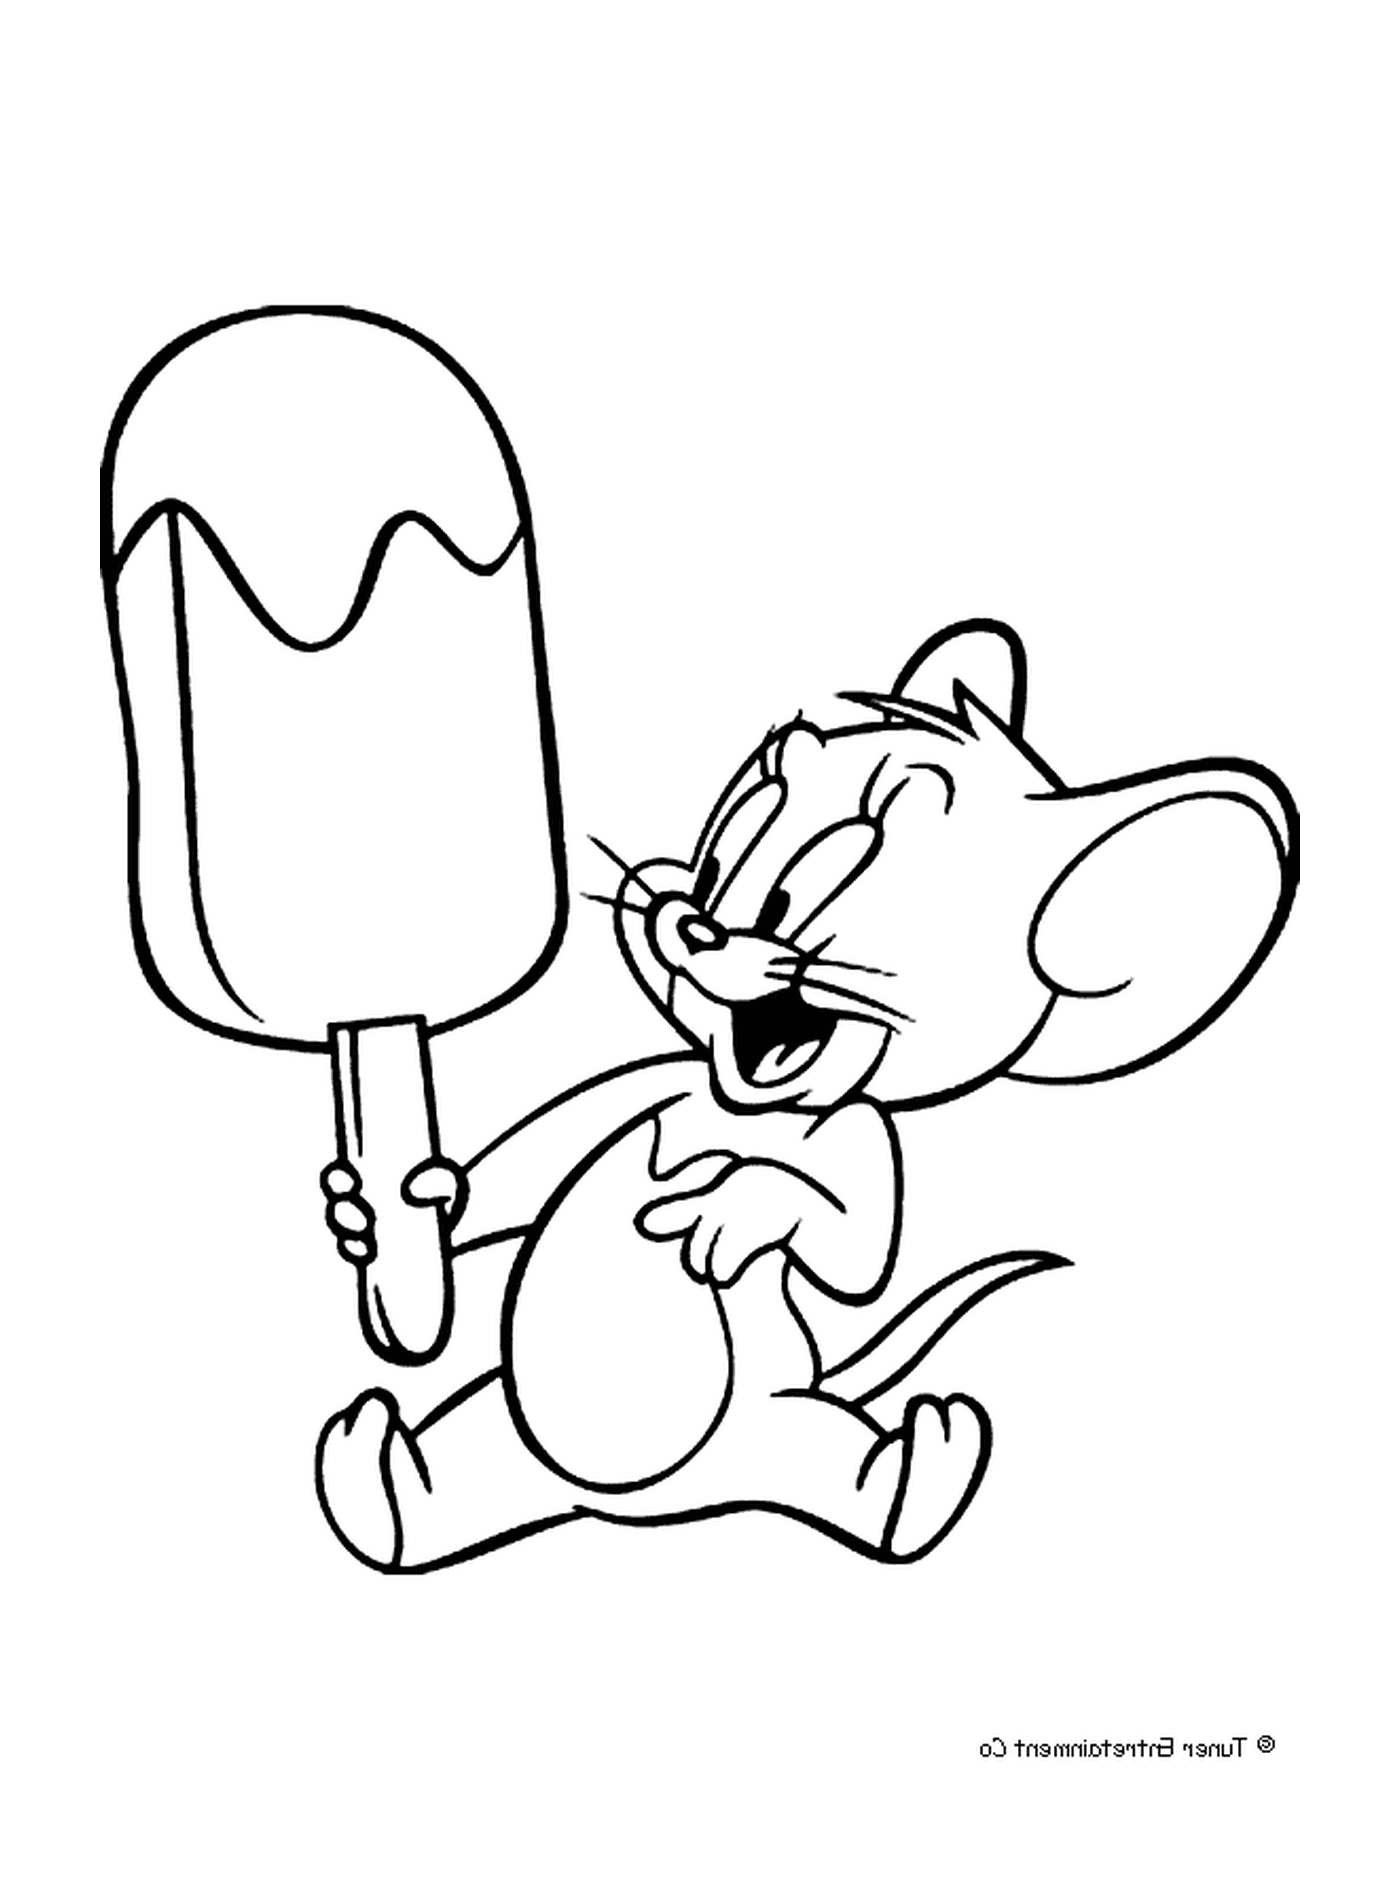  Jerry with an ice cream 